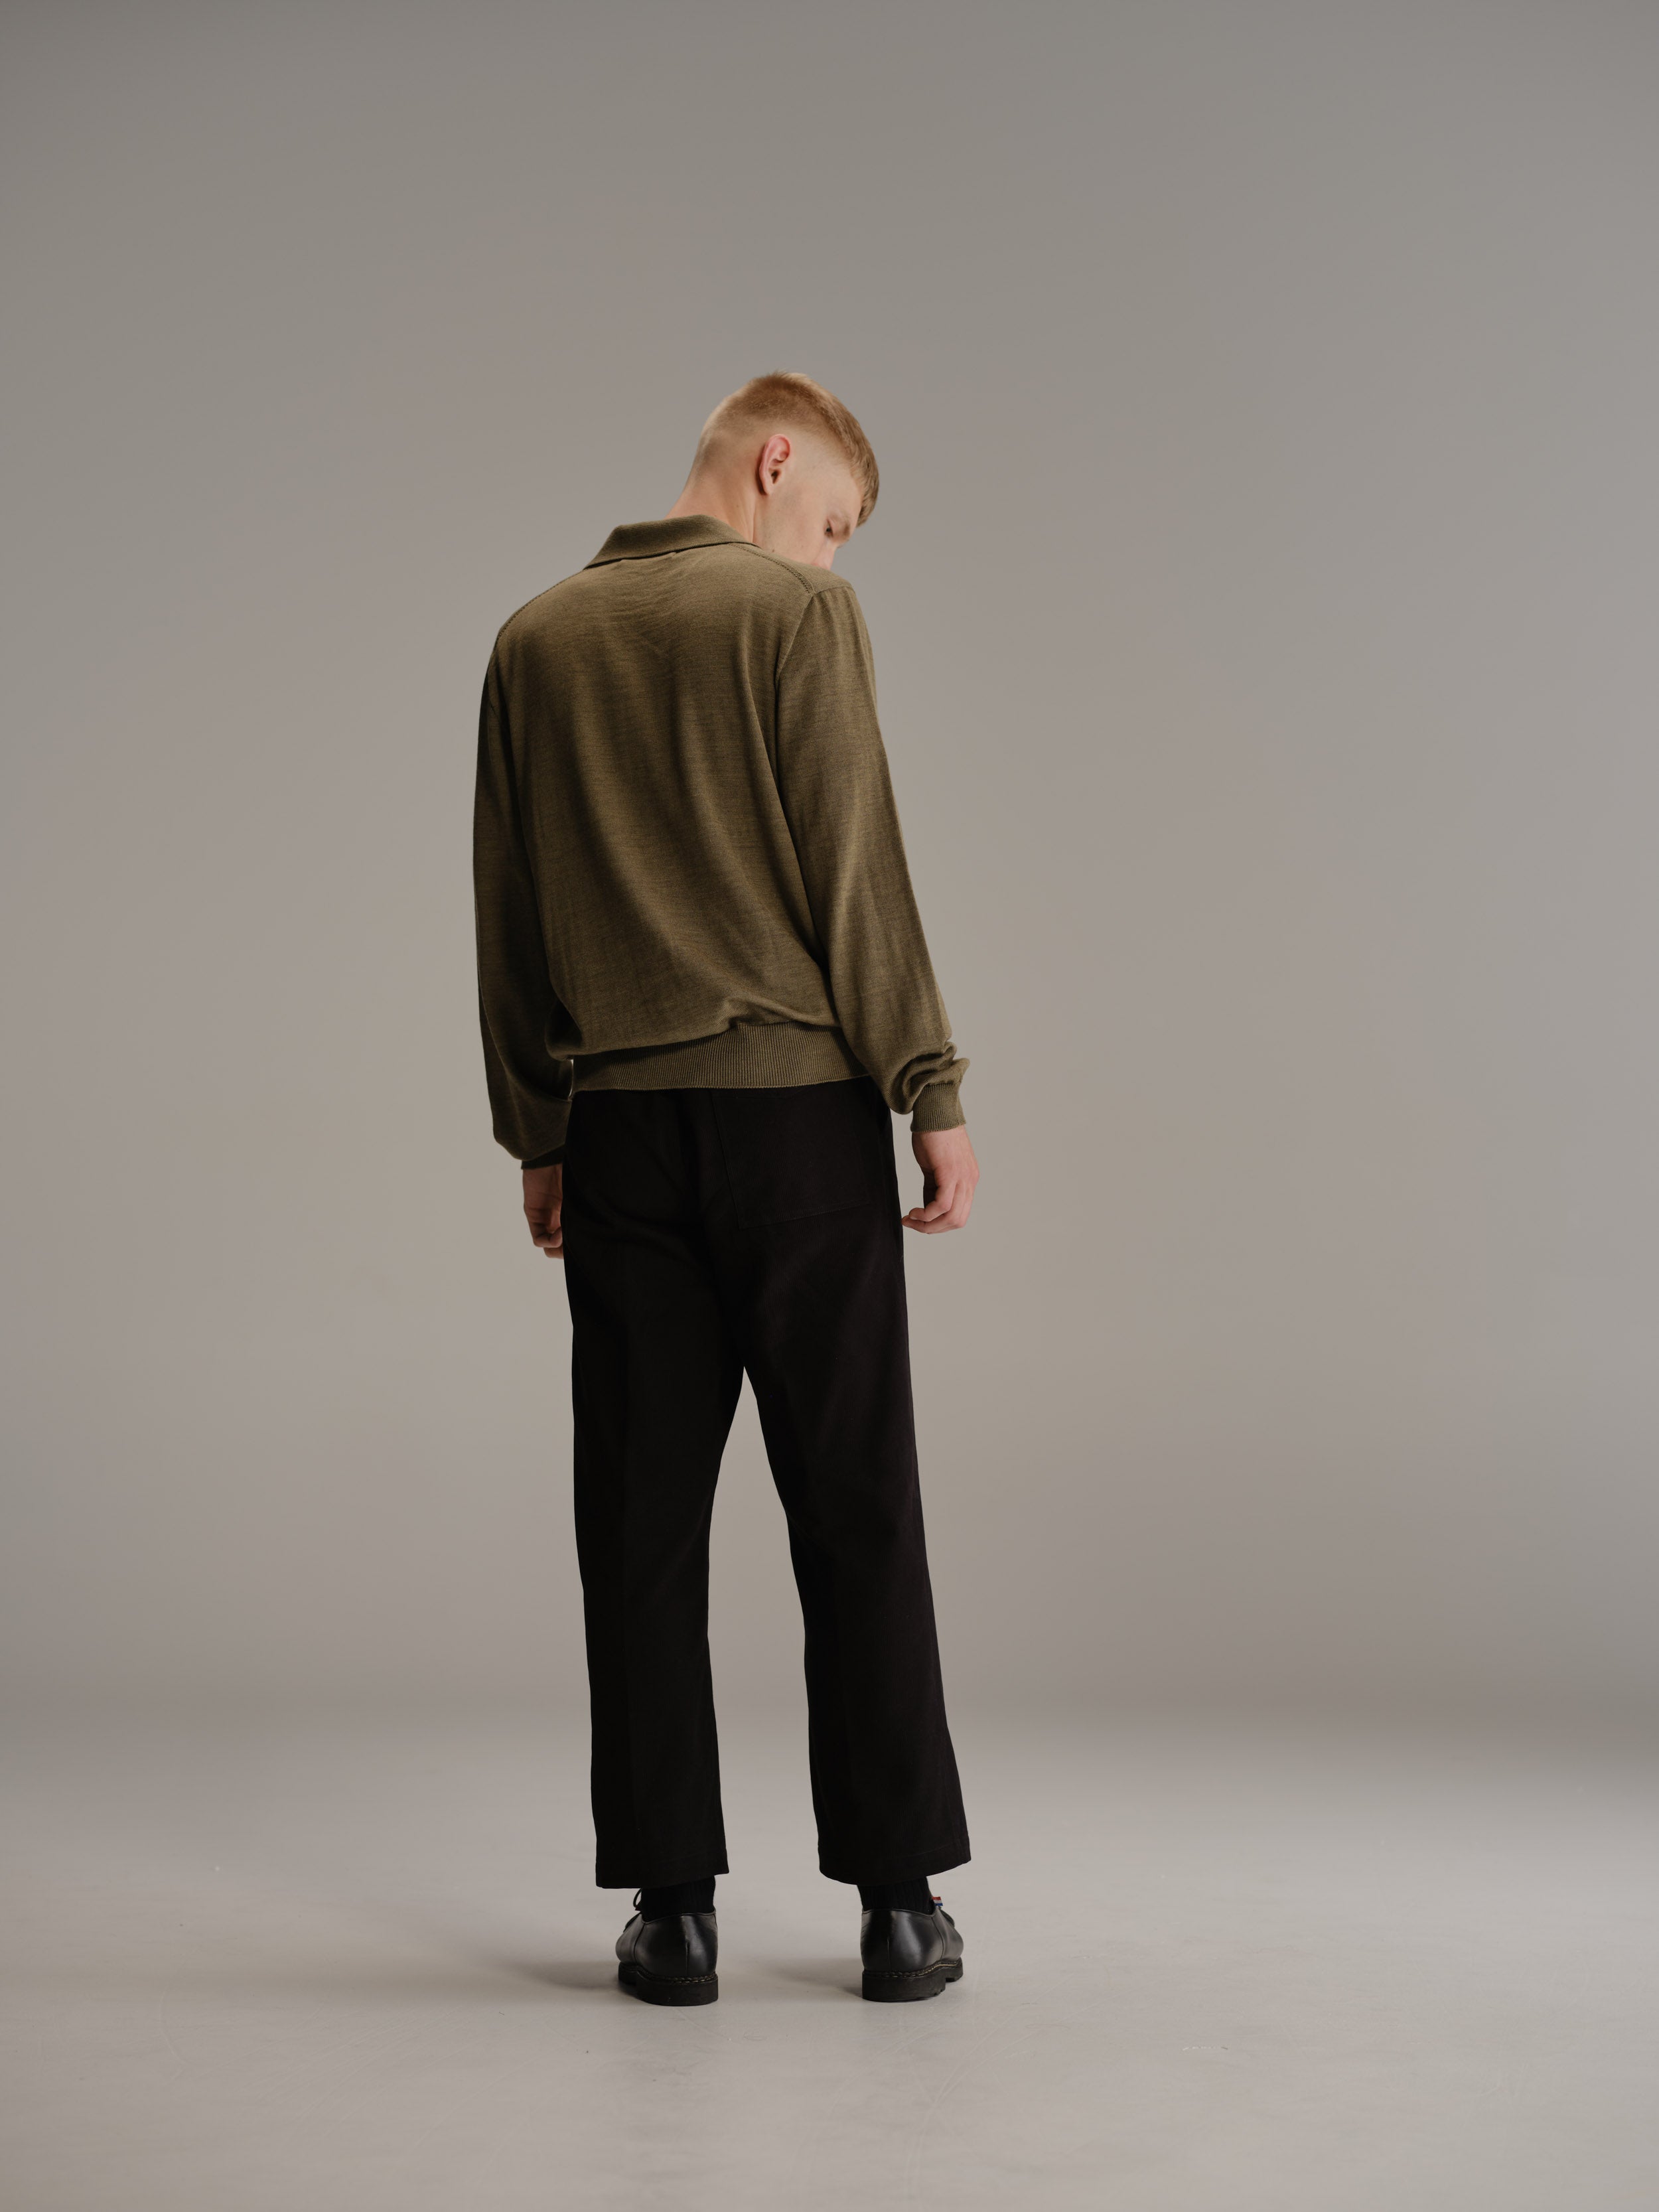 Back view of man standing in white studio looking to his right wearing sage polo shirt, black pants and black leather shoes.